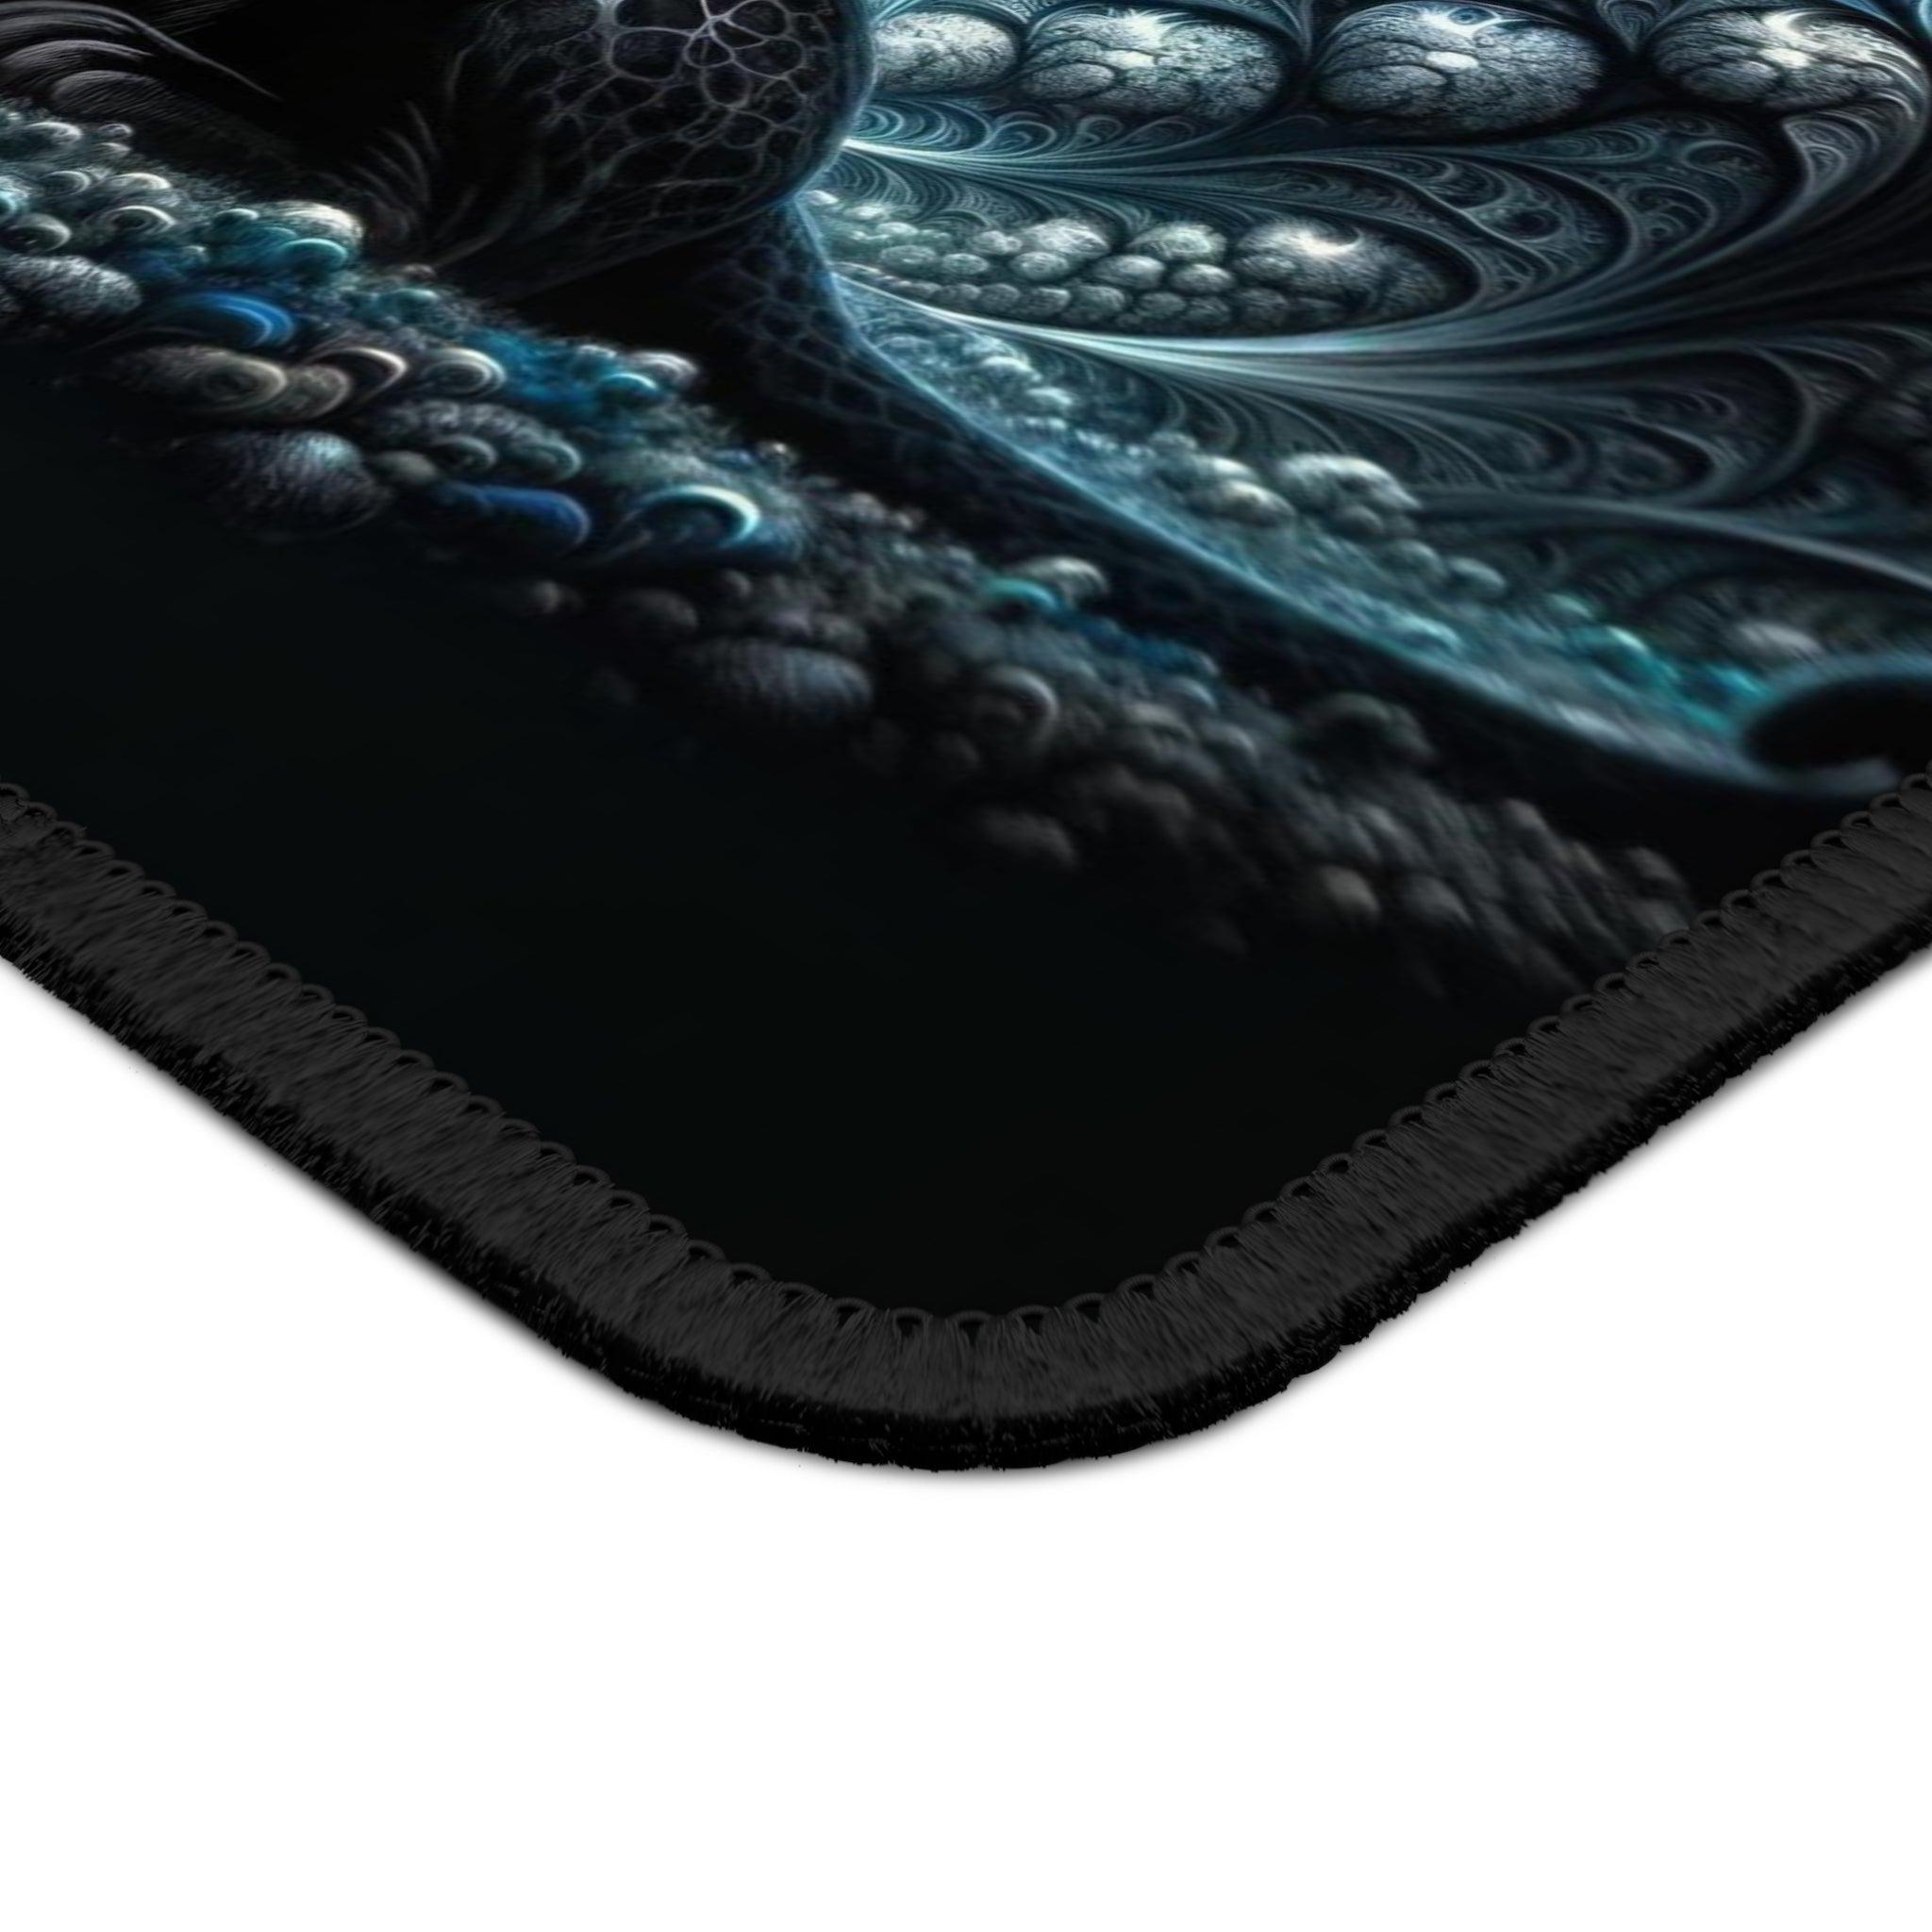 The Black Leopard’s Realm Gaming Mouse Pad